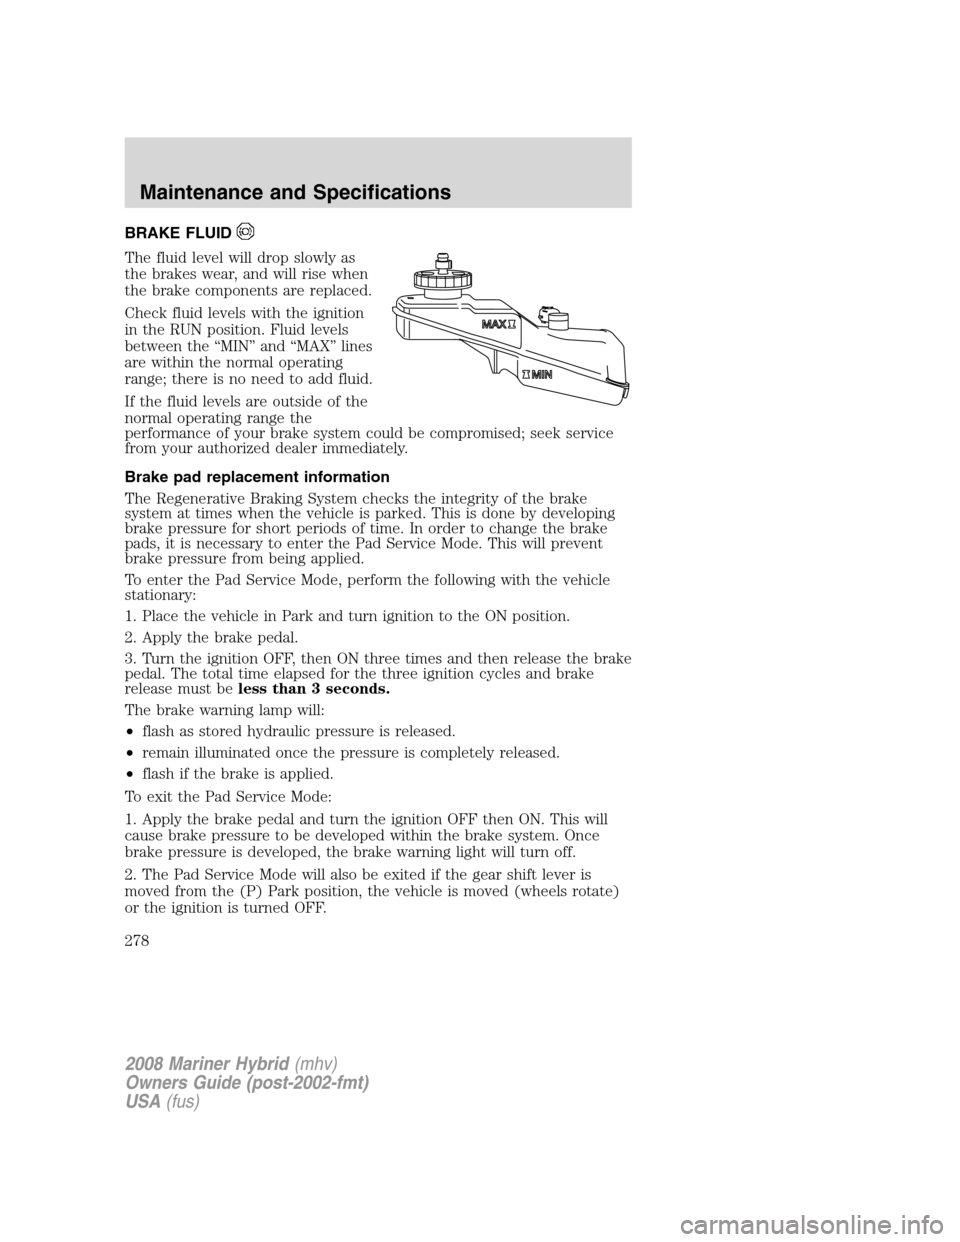 Mercury Mariner Hybrid 2008  s Service Manual BRAKE FLUID
The fluid level will drop slowly as
the brakes wear, and will rise when
the brake components are replaced.
Check fluid levels with the ignition
in the RUN position. Fluid levels
between th